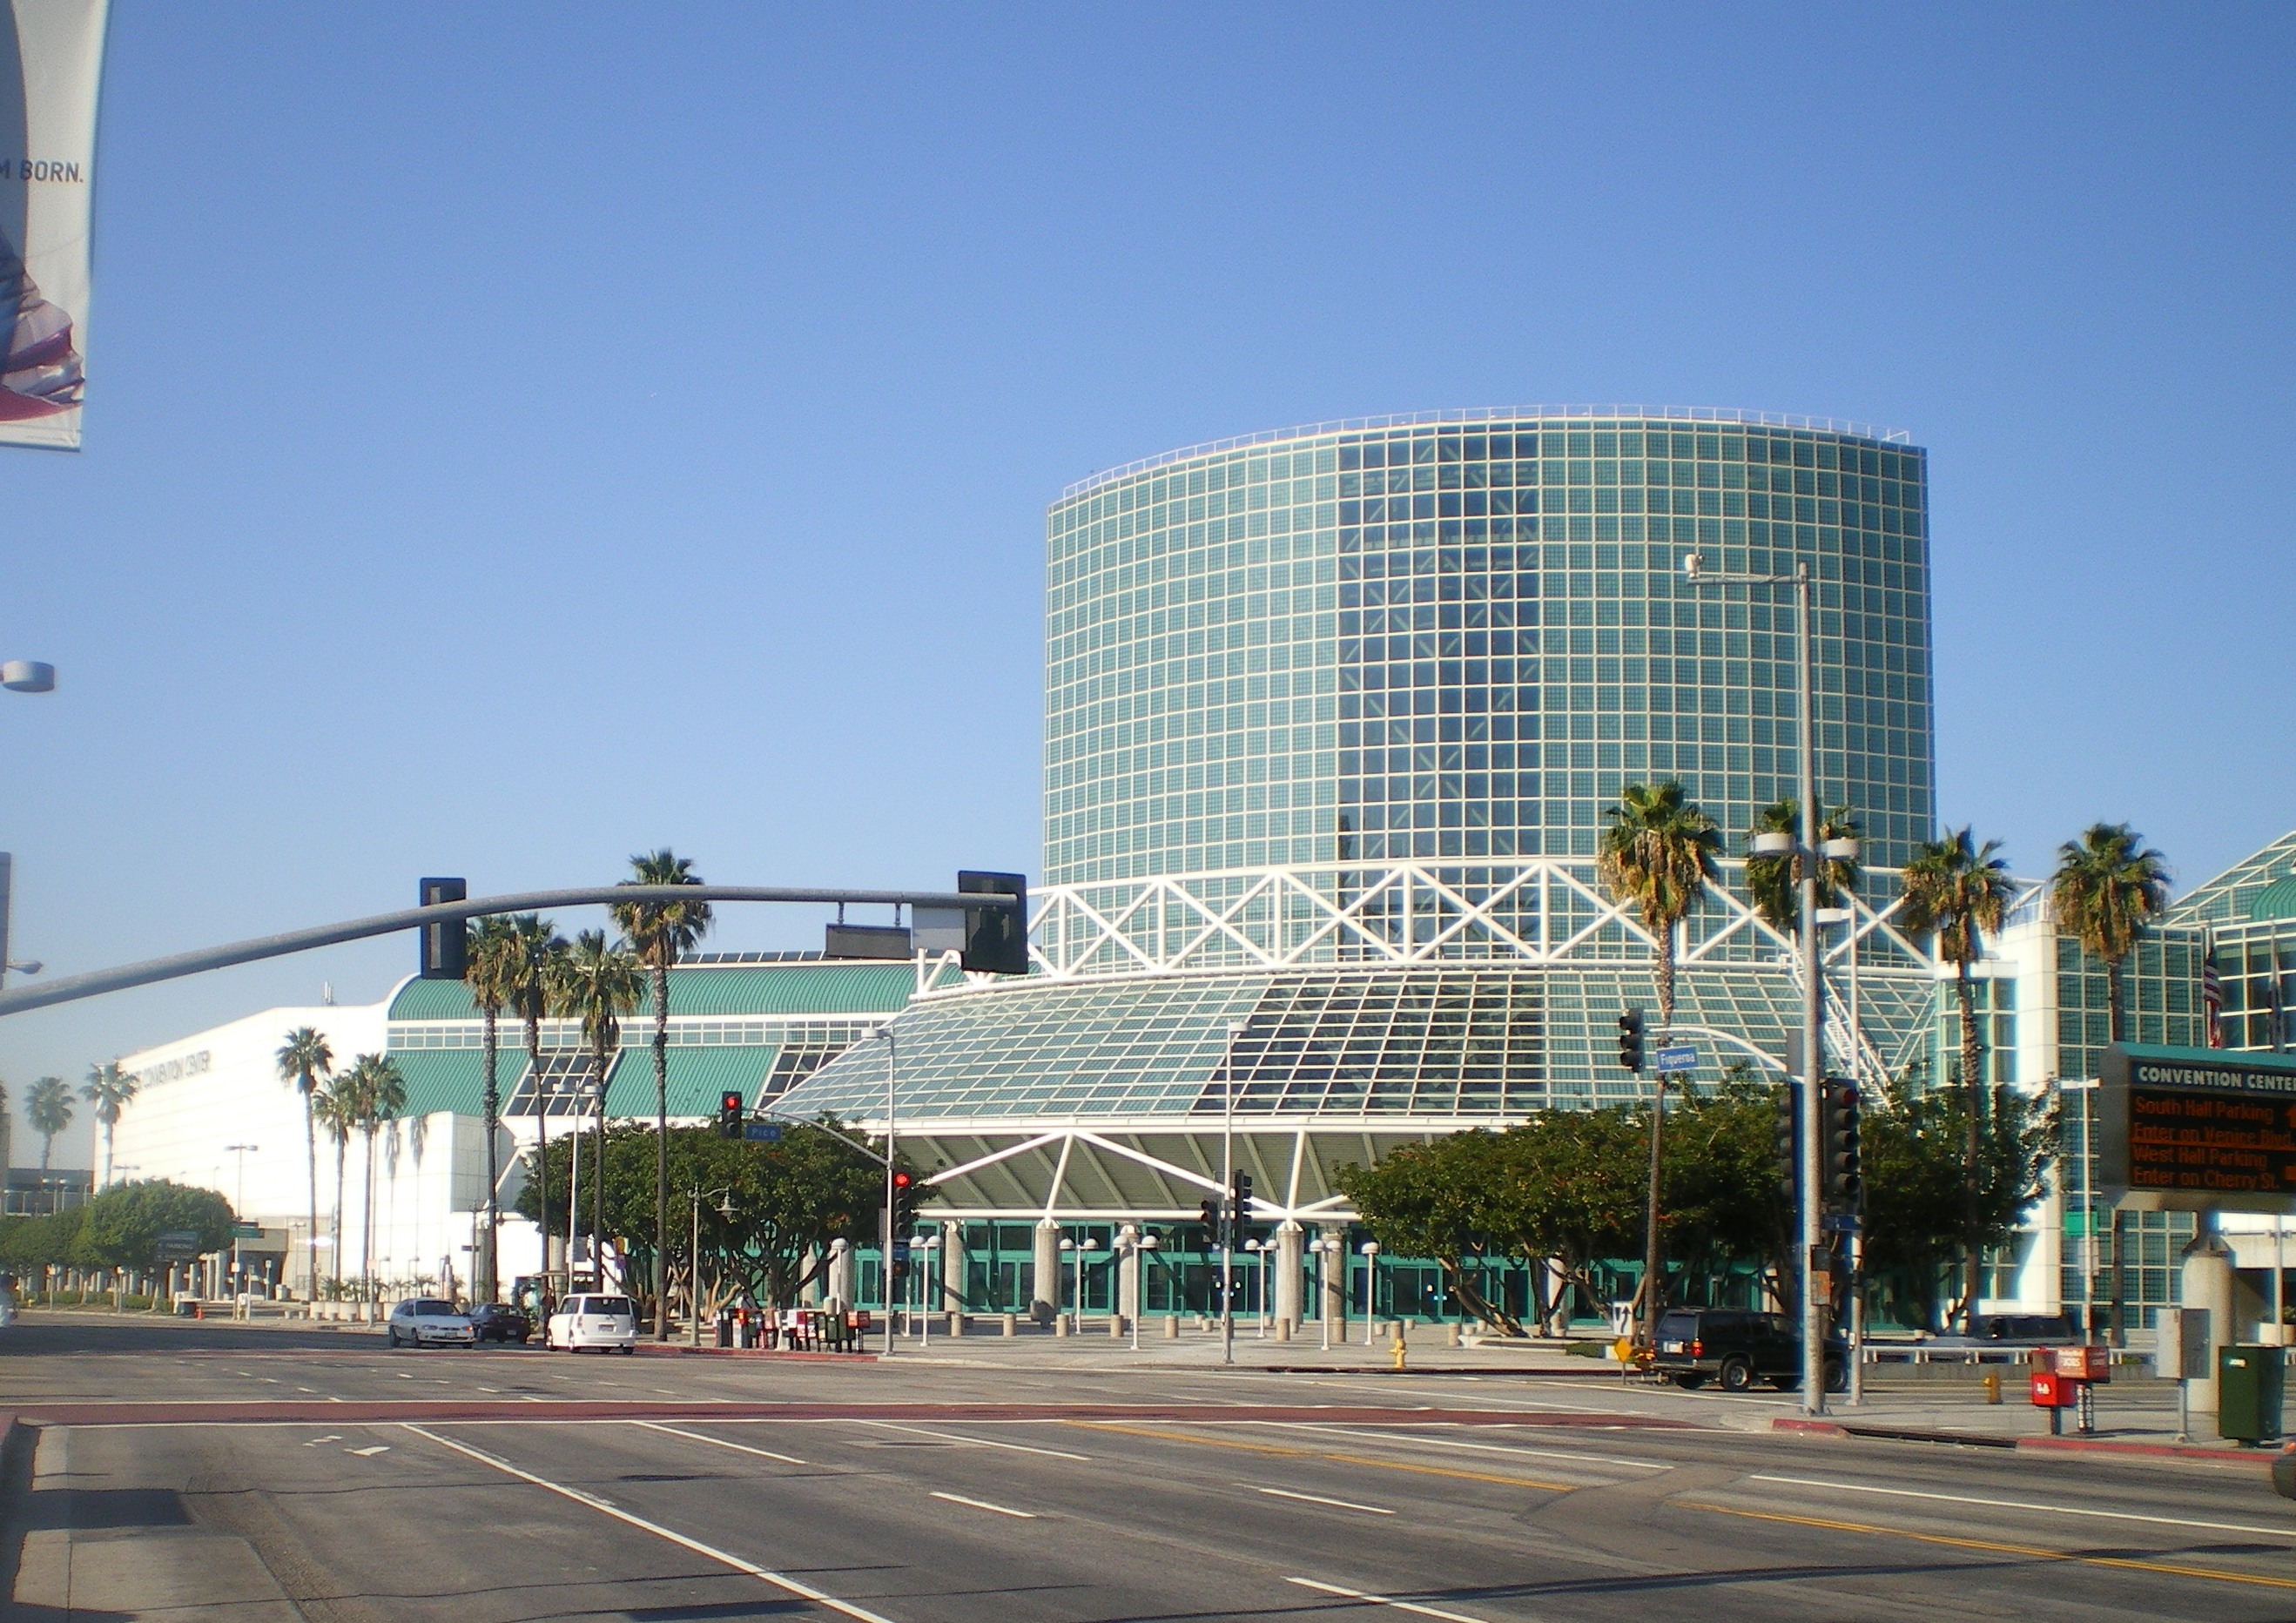 NoA releases statement concerning E3 – two smaller events